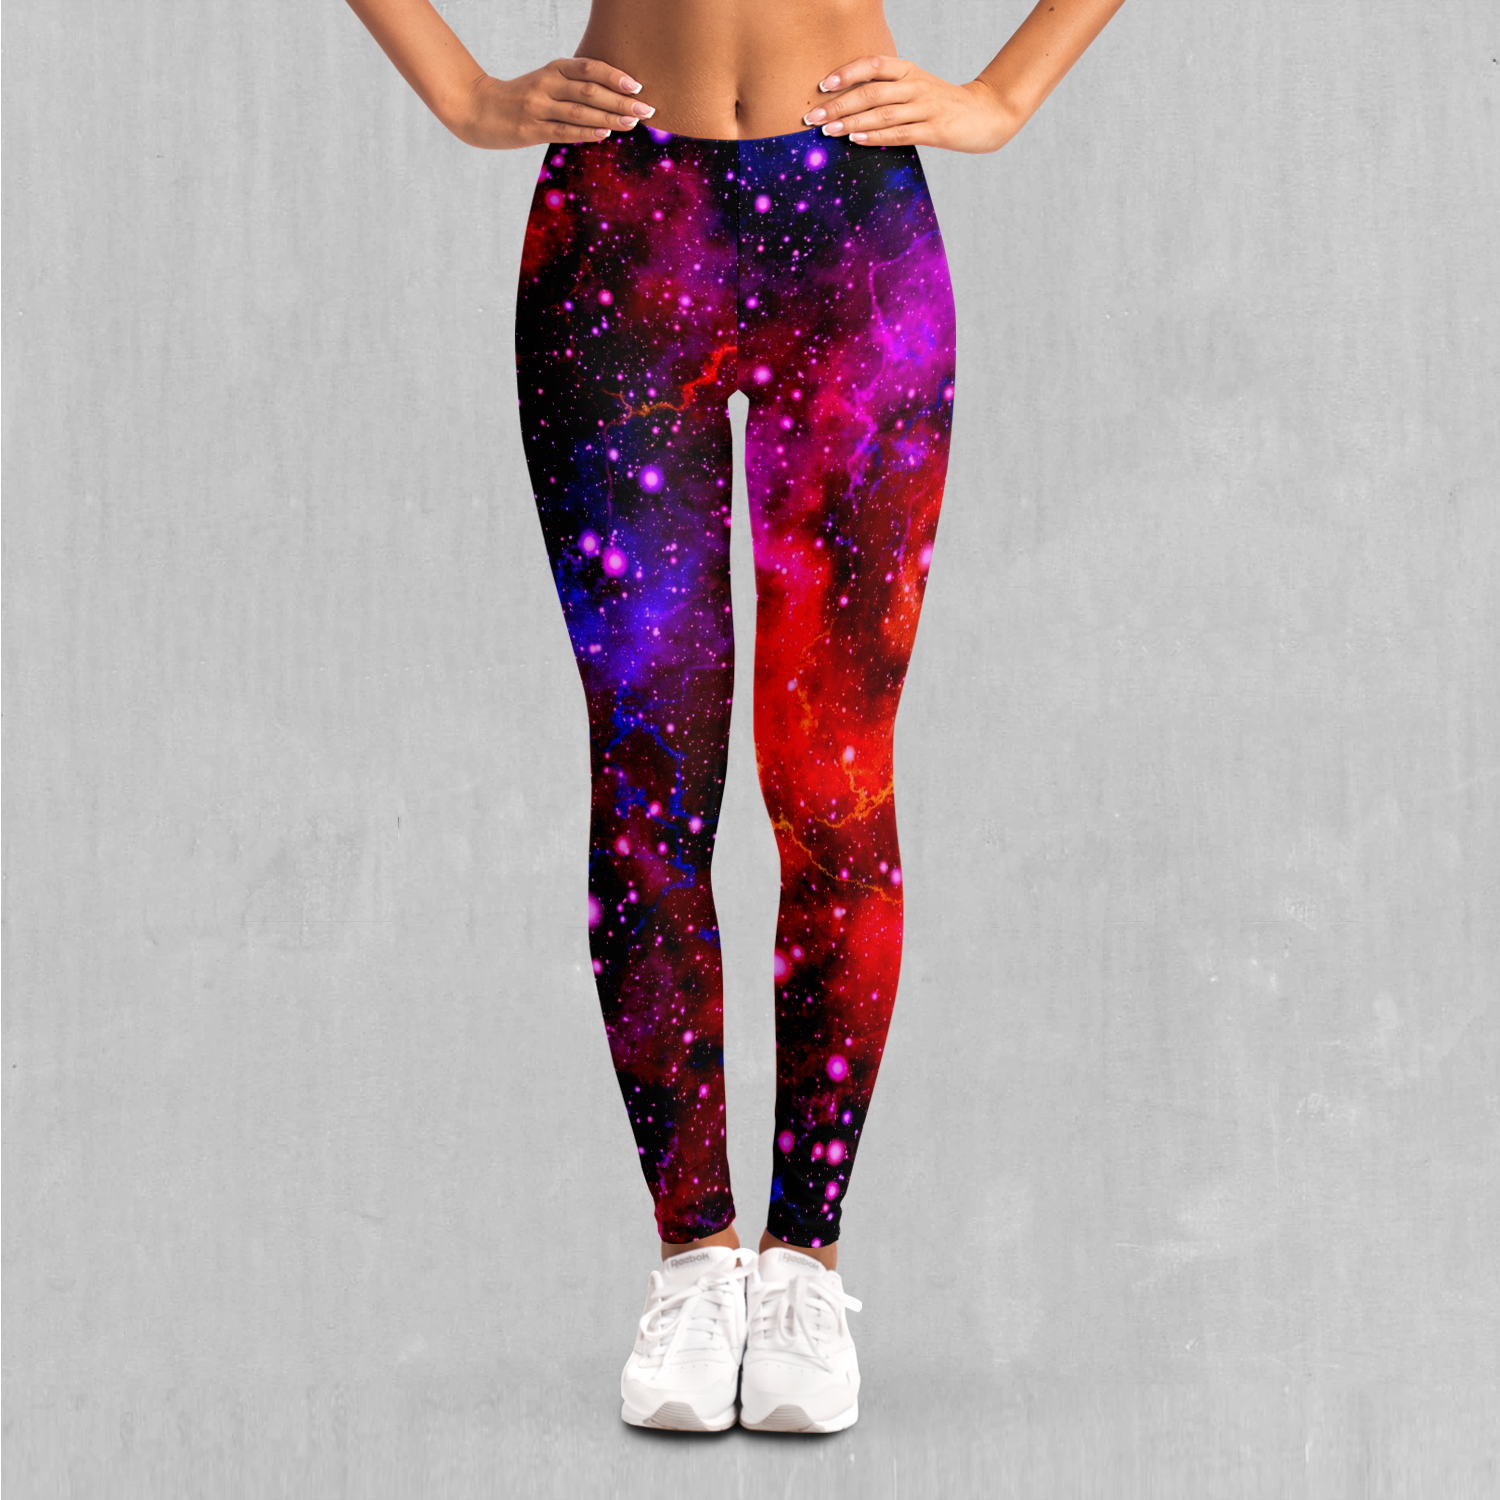 Spiral Galaxy Yoga Pants For Women High Waist Leggings with Pockets For Gym Workout  Tights : Amazon.co.uk: Fashion